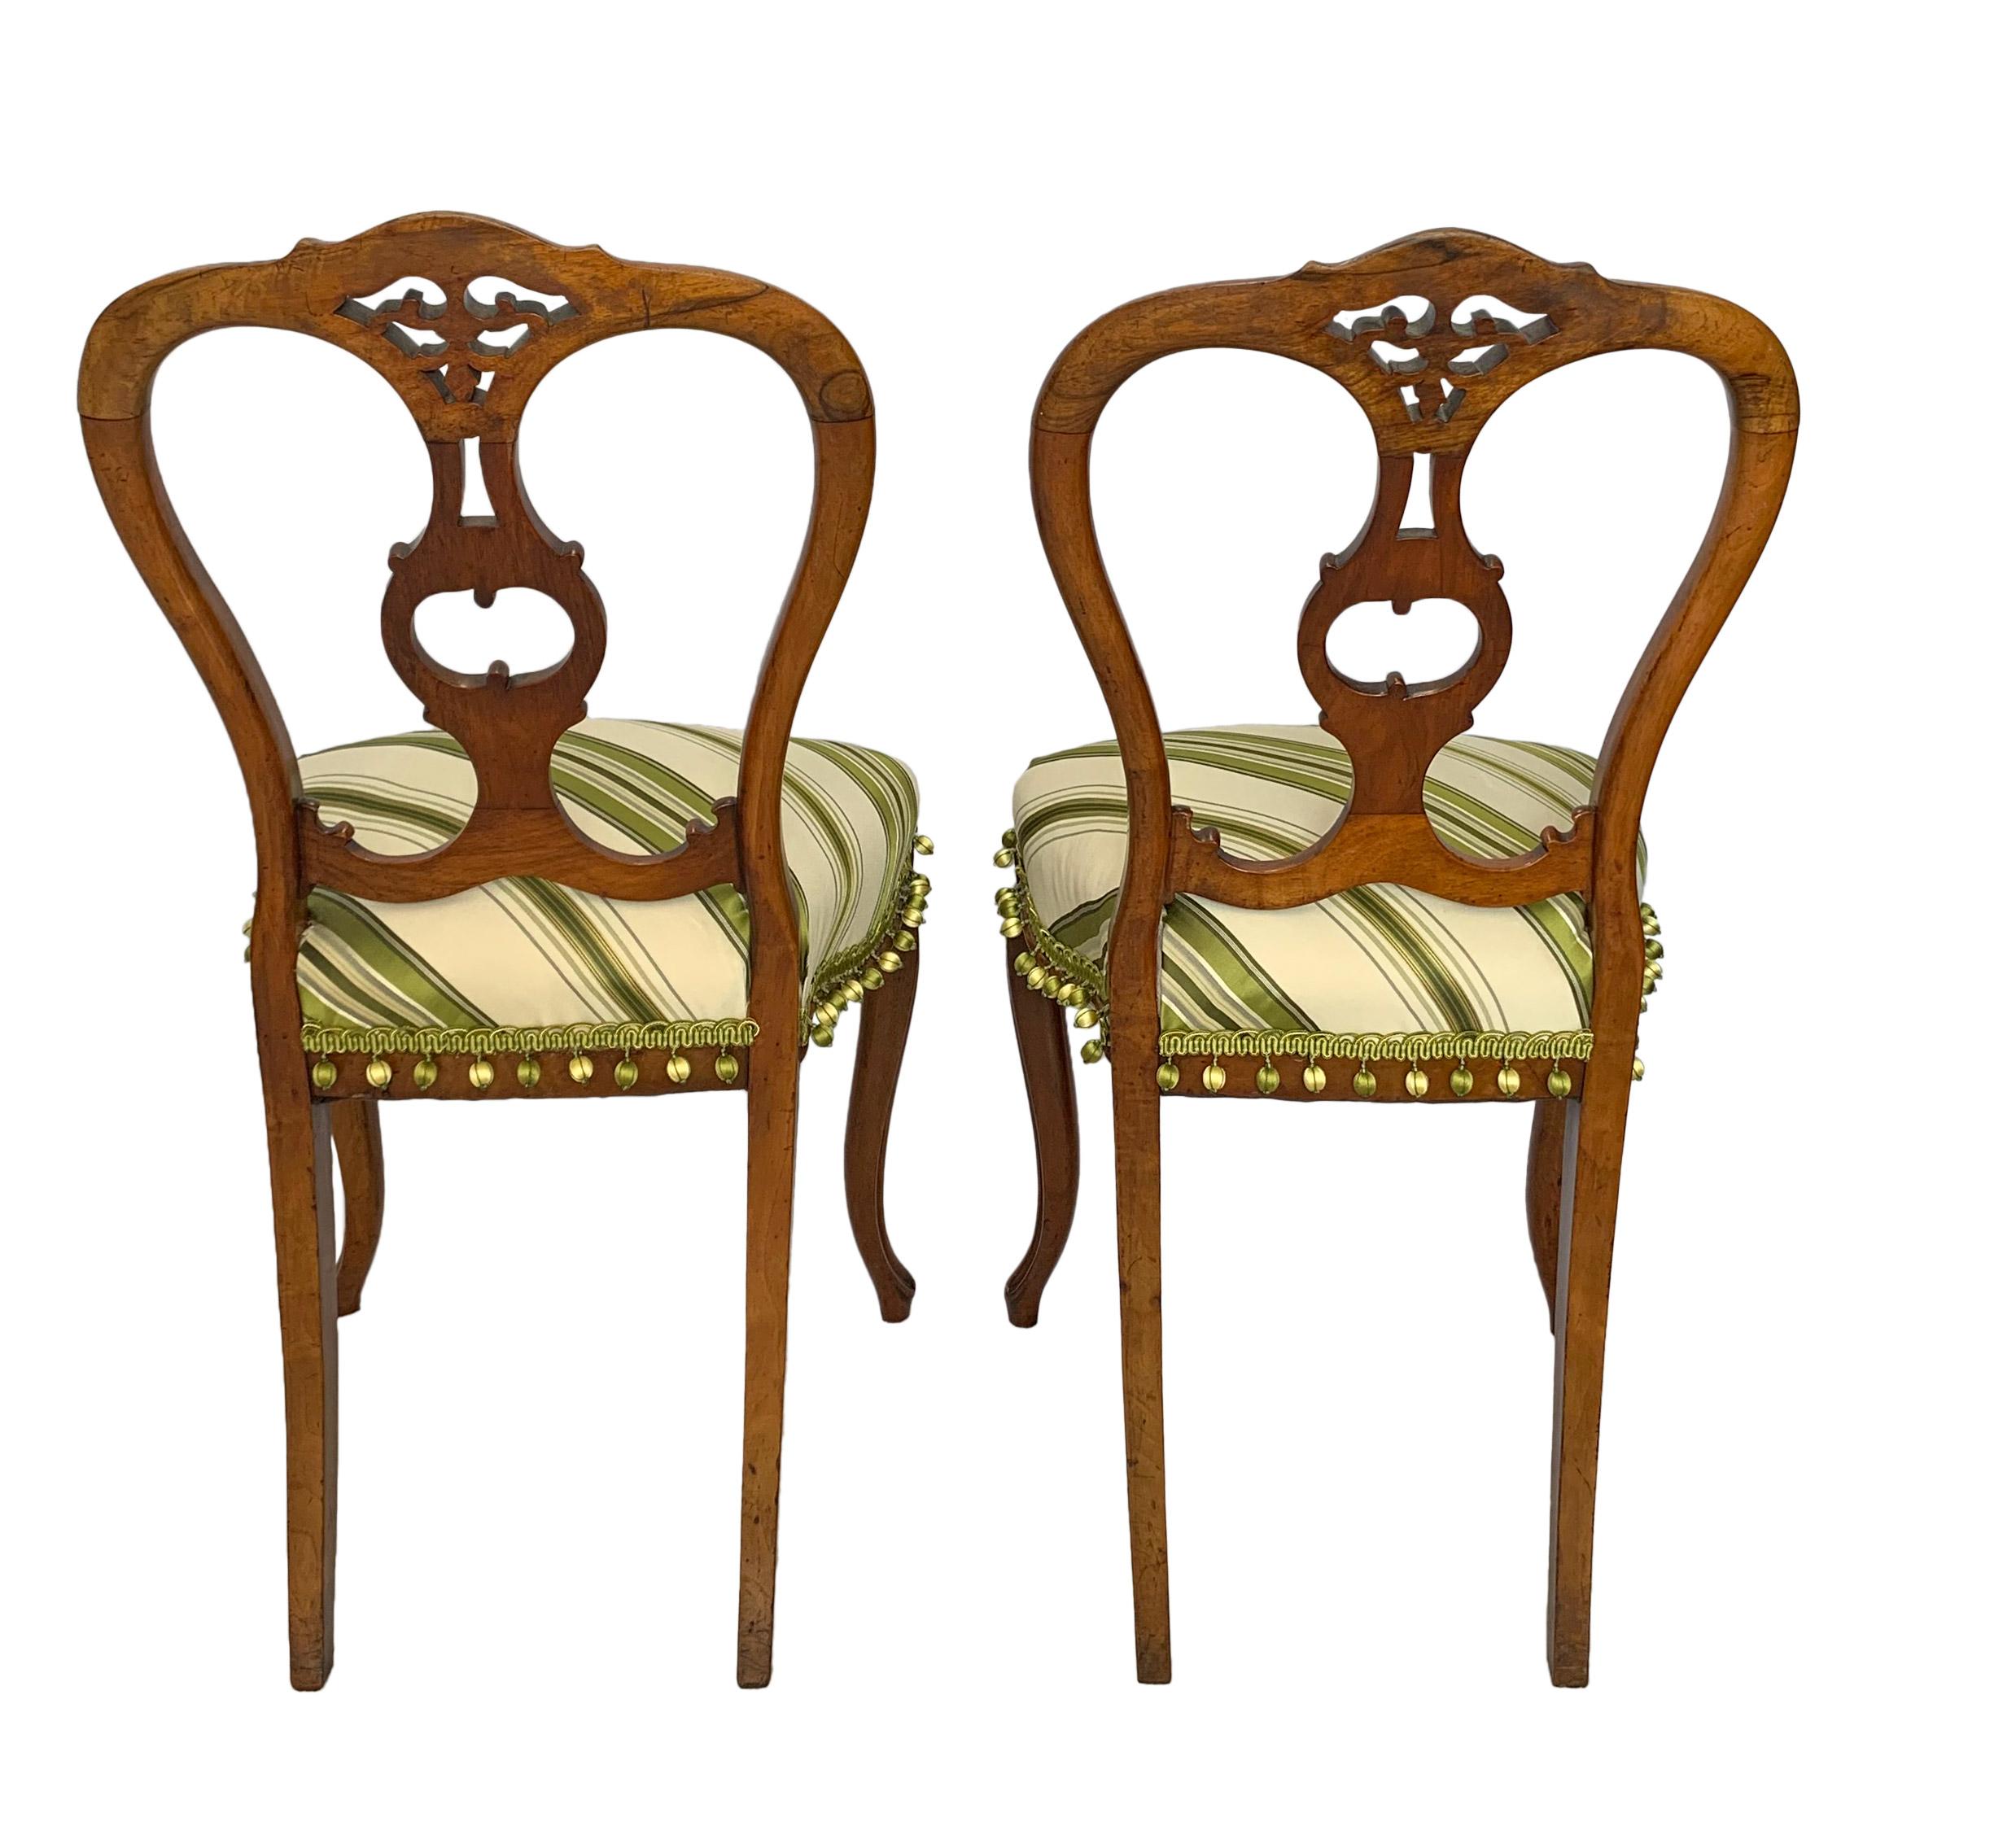 Early 20th century Petite Victorian style elegantly sculpted balloon back chairs. This modern take on the Victorian balloon back side chair which traditionally has smaller seats to accommodate the ladies’ massive skirt bustle is perfect for a more